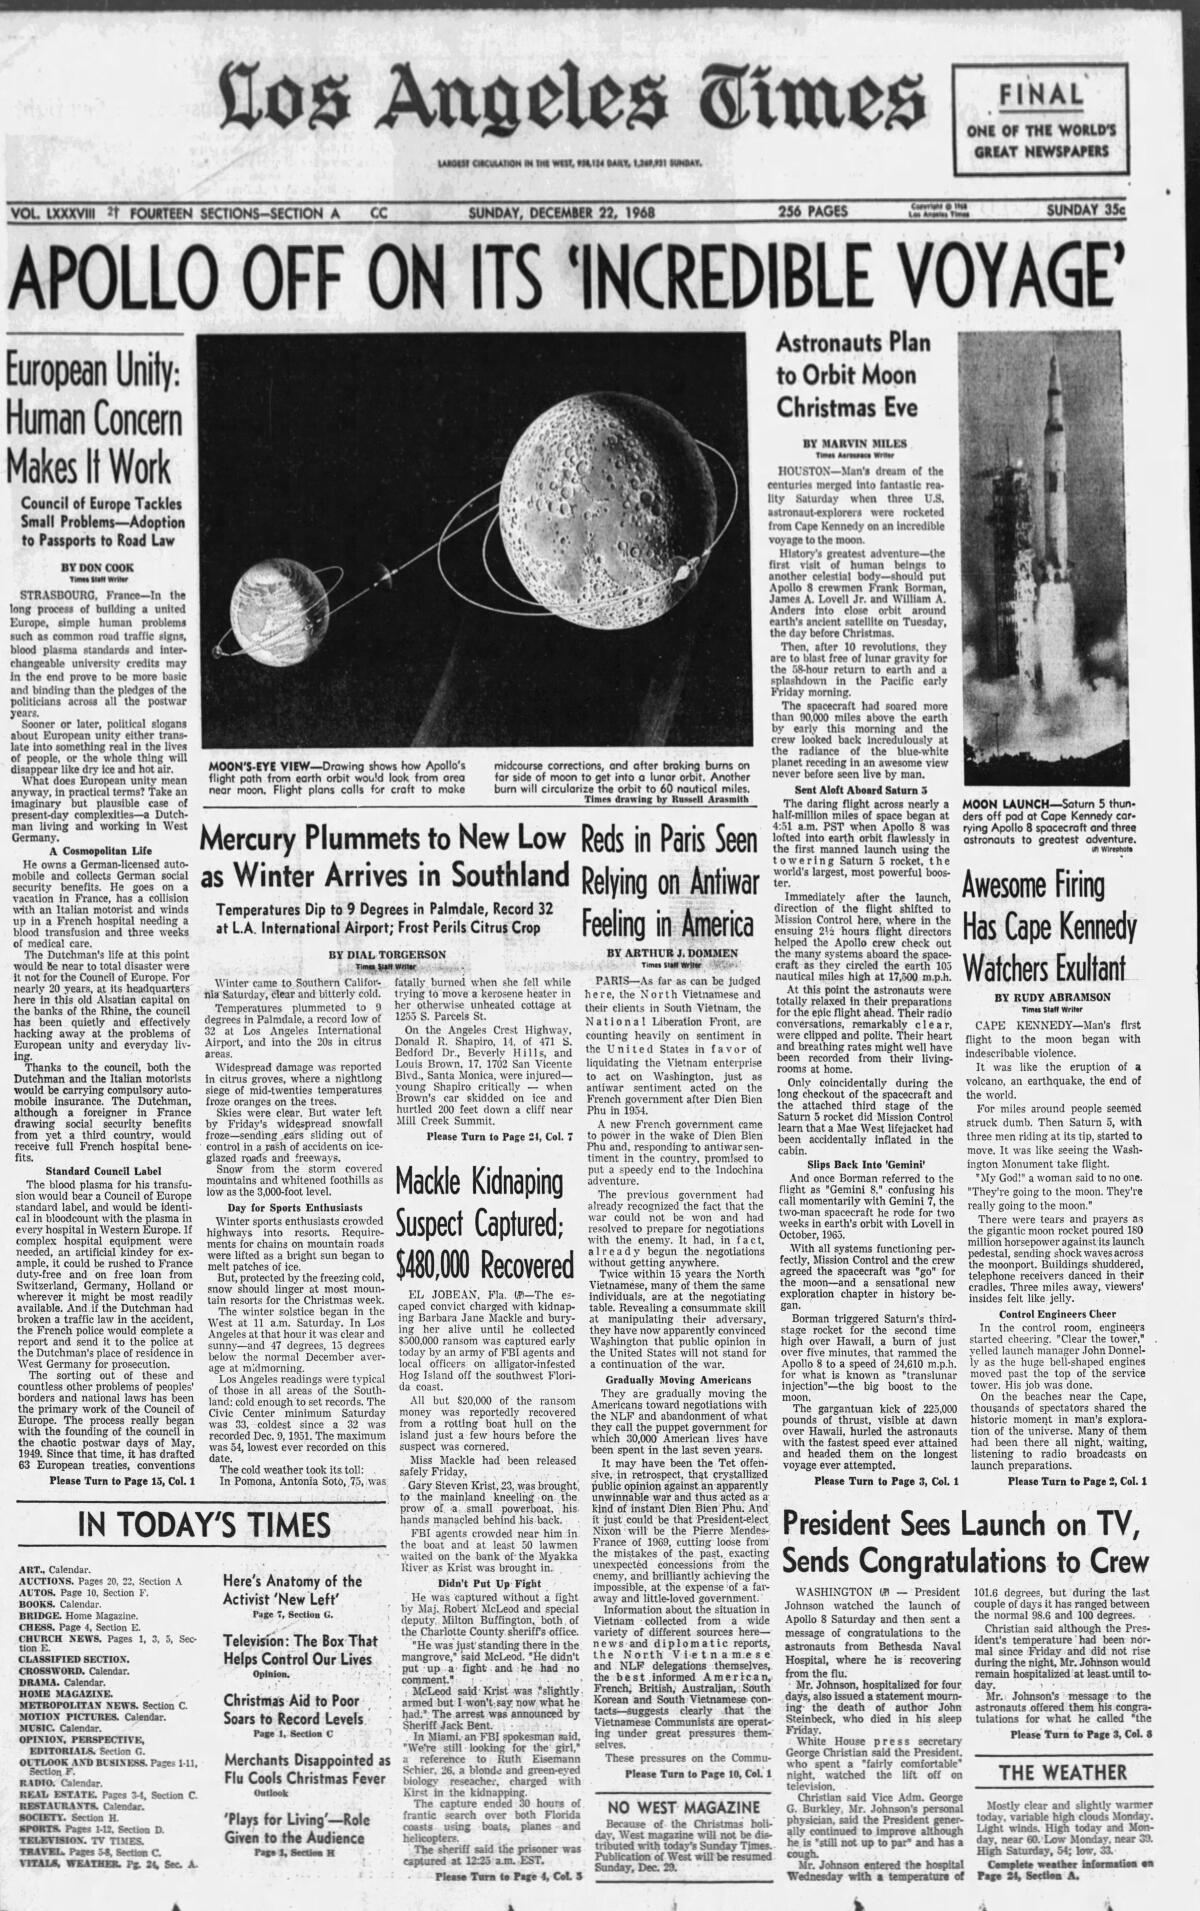 Los Angeles Times newspaper clipping of Apollo 8 taking off for the moon